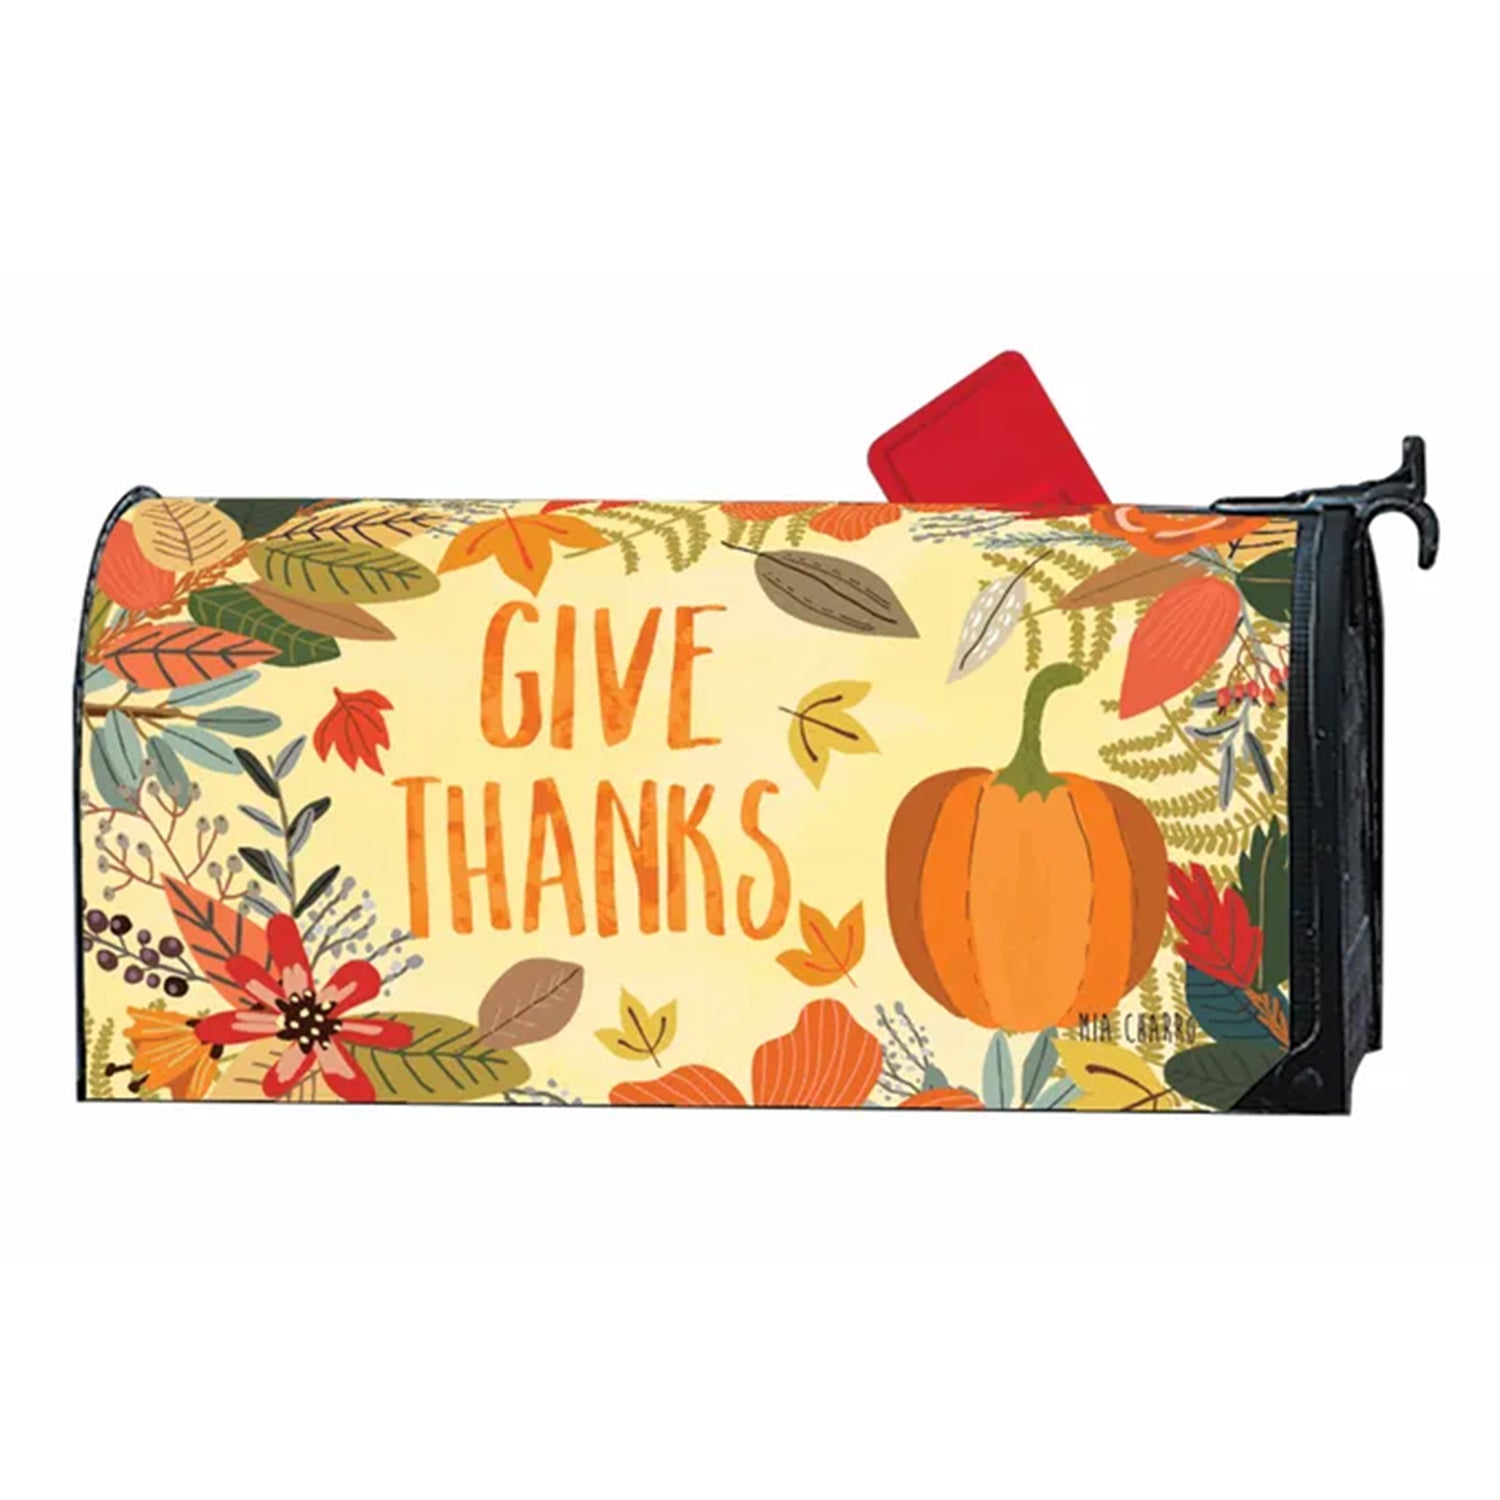 We Give Thanks Mailwrap